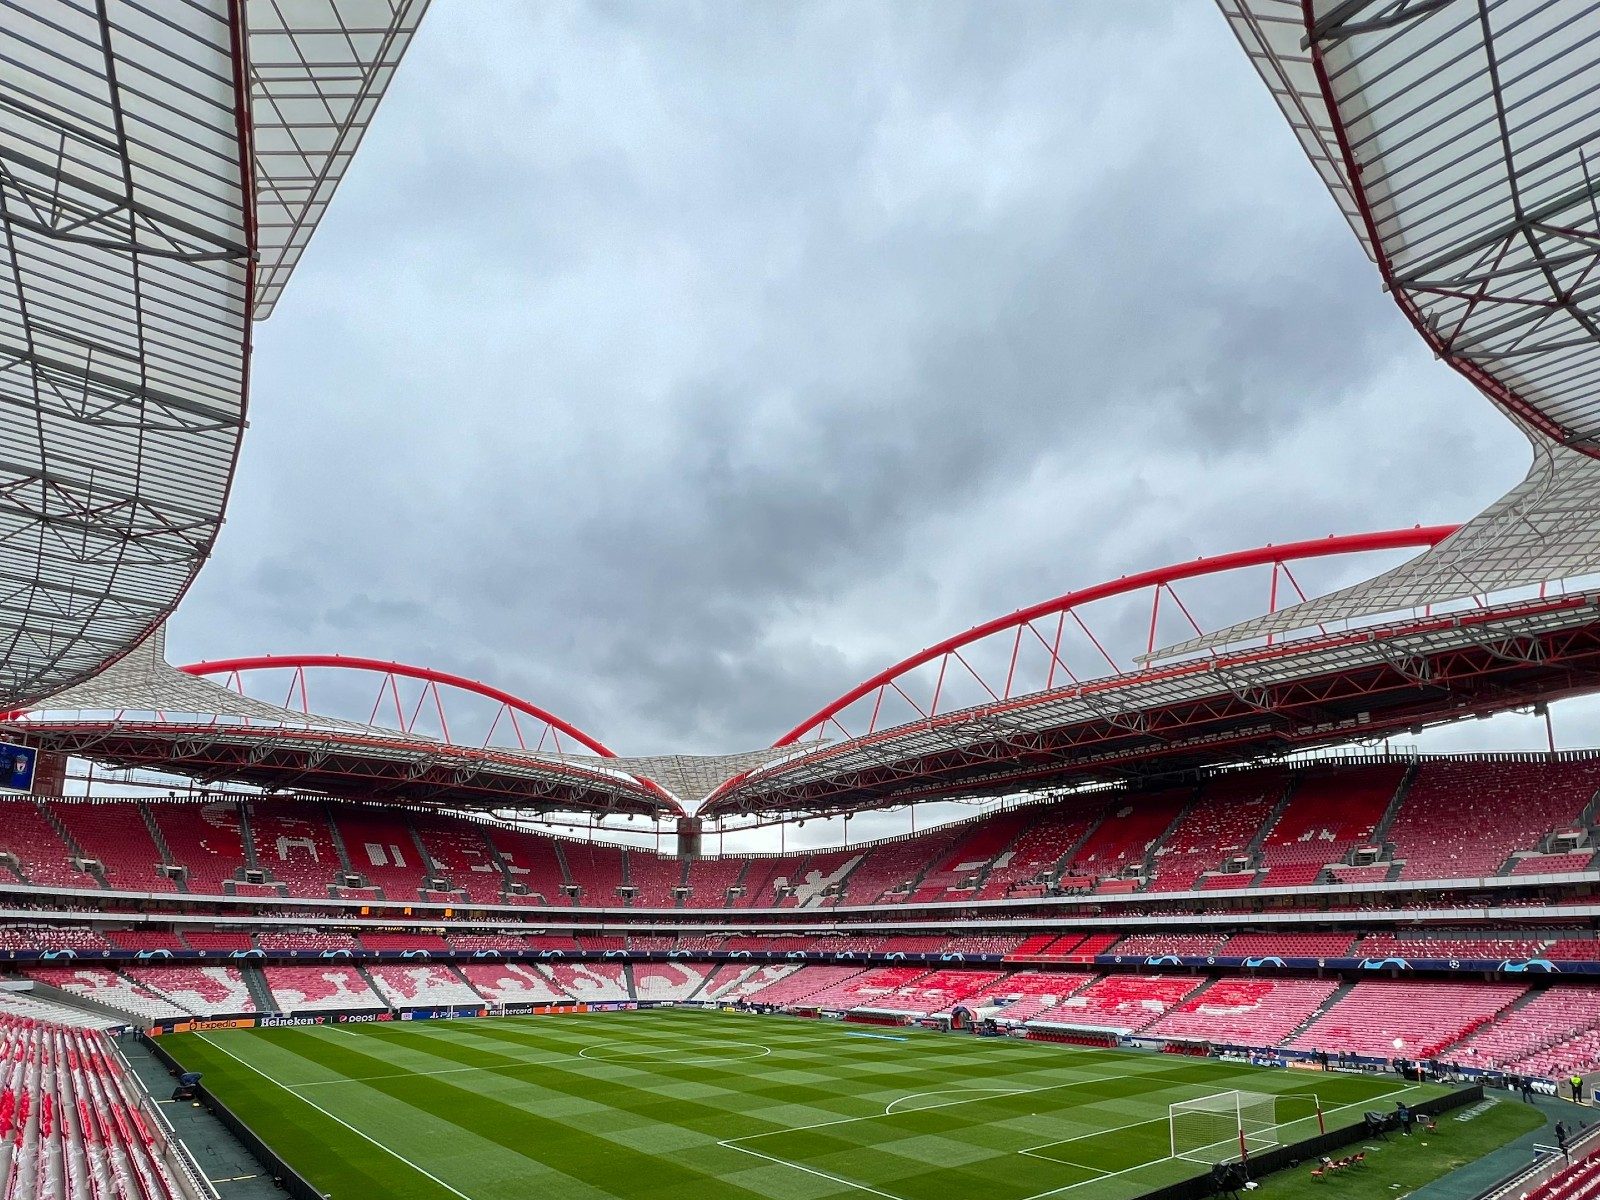 UEFA Champions League 2021-22 Benfica vs Liverpool LIVE Streaming- When and Where to Watch